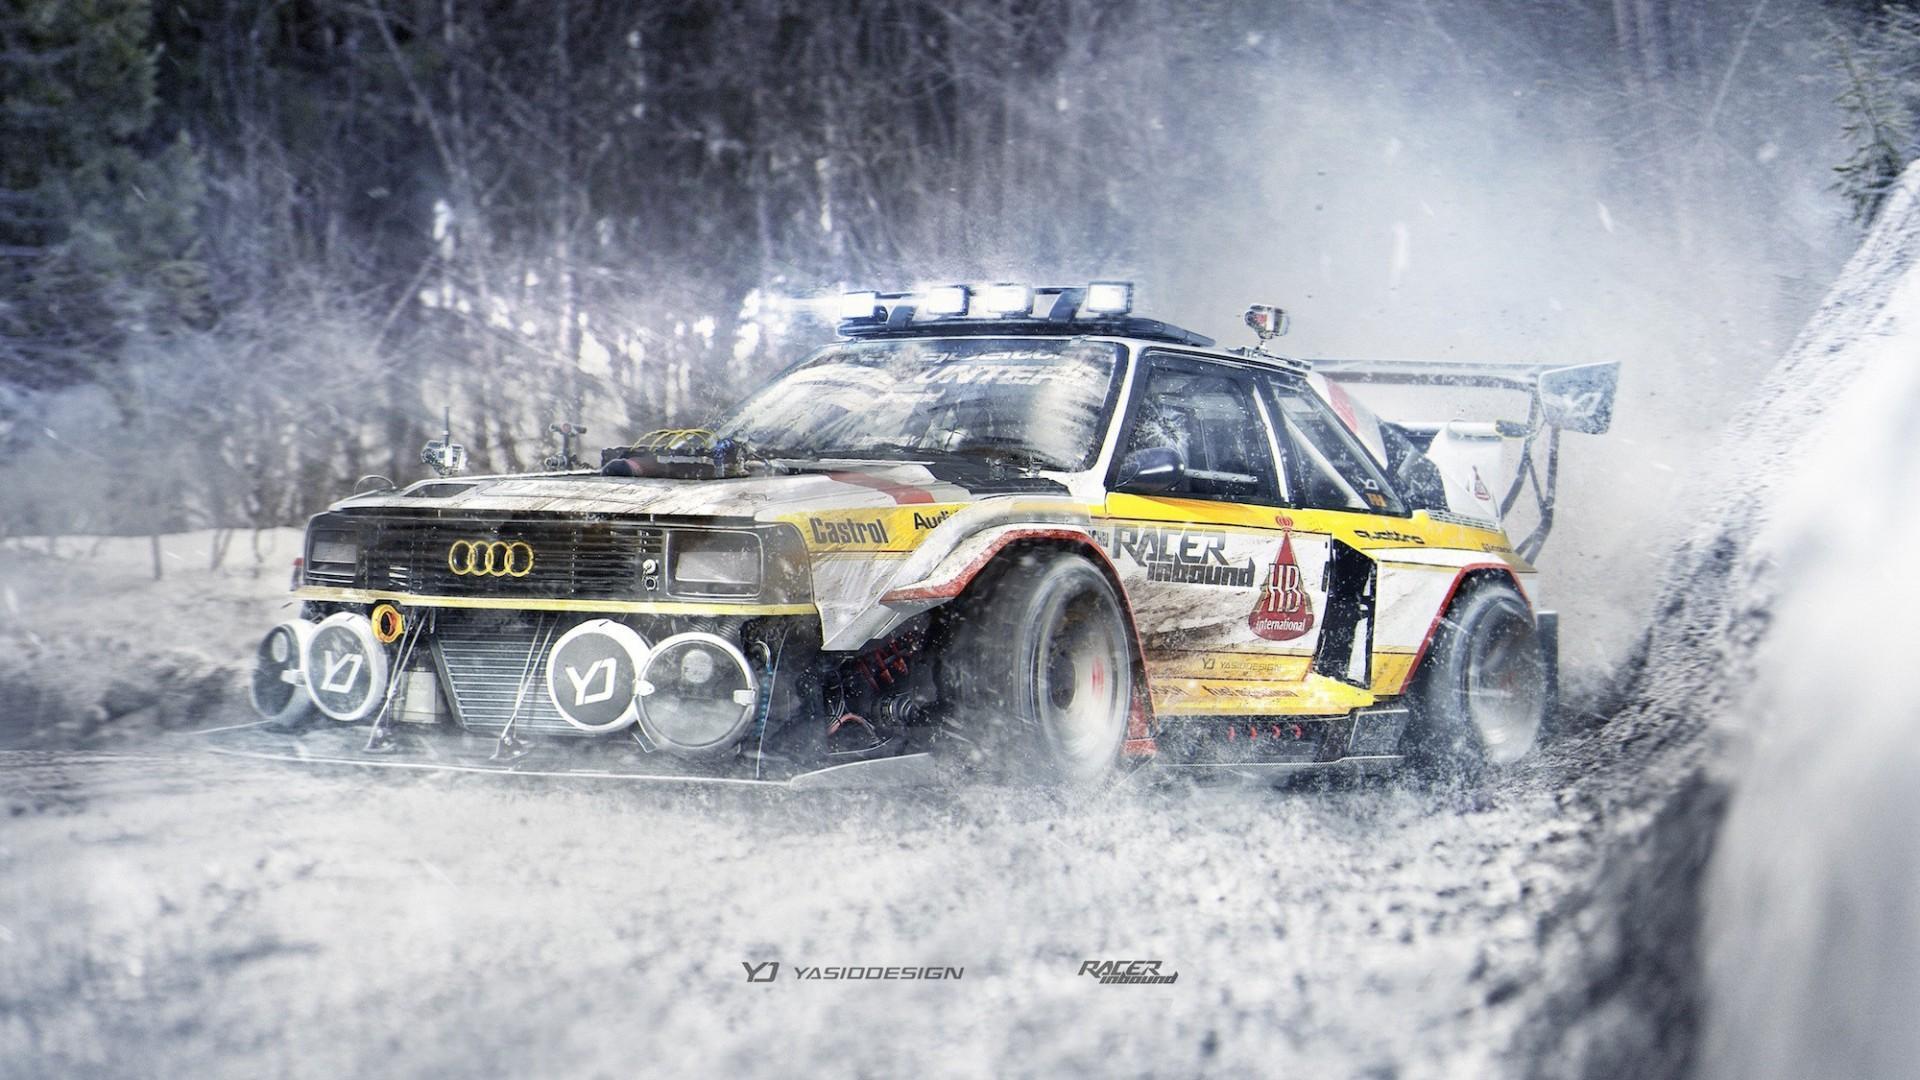 android dirt rally background